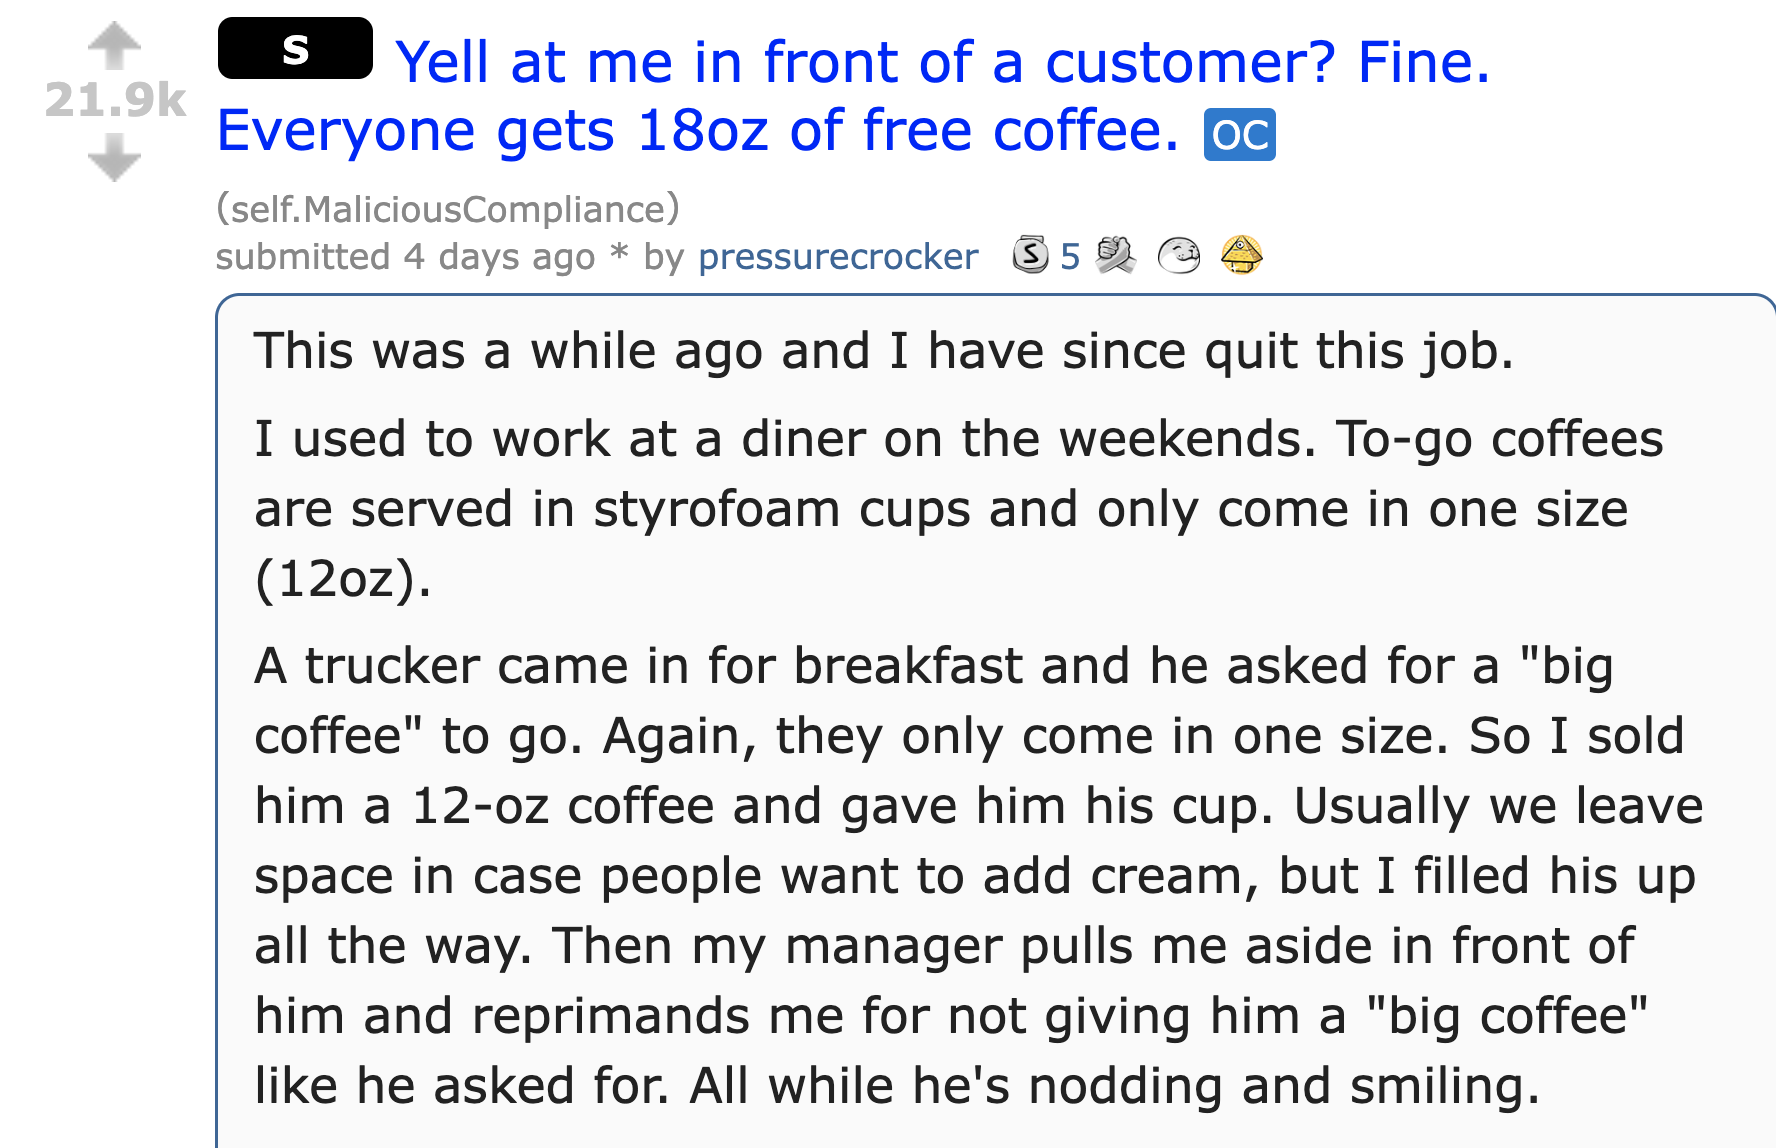 malicious compliance free coffee - -  - S Yell at me in front of a customer? Fine. Everyone gets 18oz of free coffee. oc self.MaliciousCompliance submitted 4 days ago by pressurecrocker 5 @ A This was a while ago and I have since quit this job. I used to 